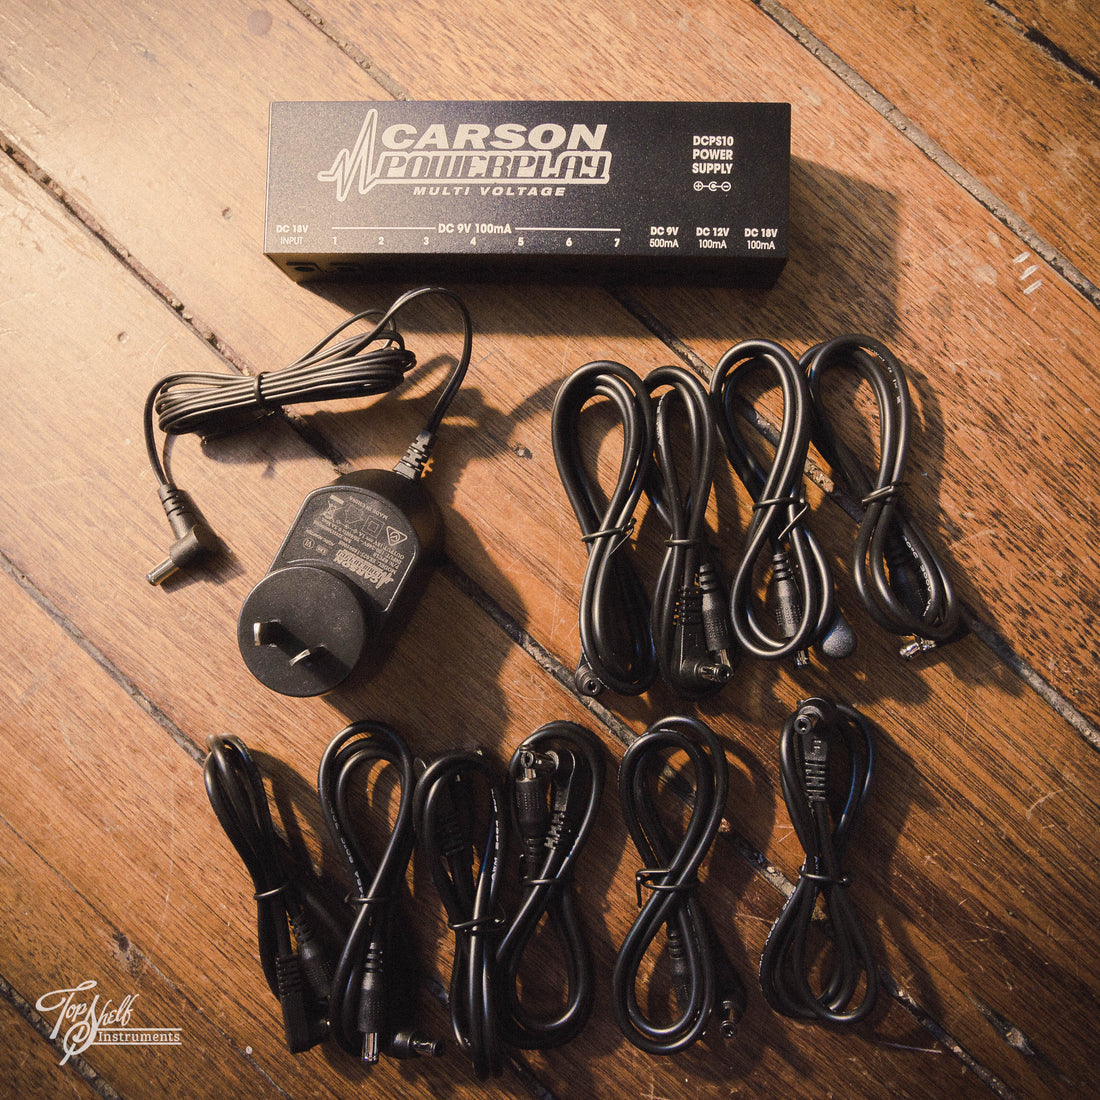 Carson  Powerplay DCPS10 Filtered Pedal Power Supply (new)